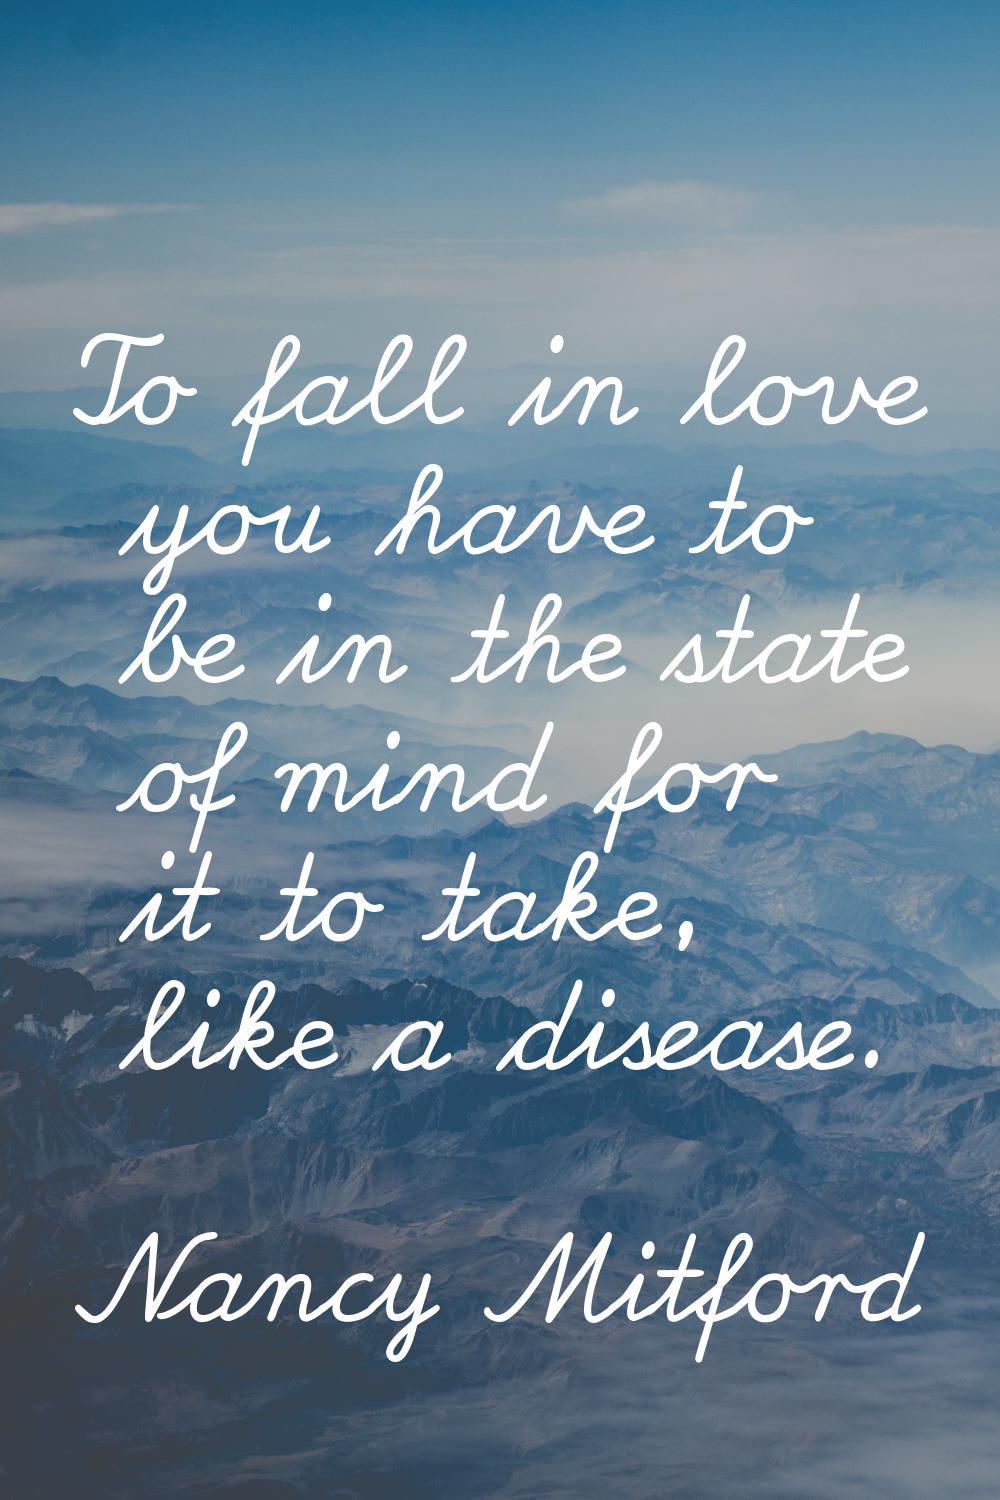 To fall in love you have to be in the state of mind for it to take, like a disease.